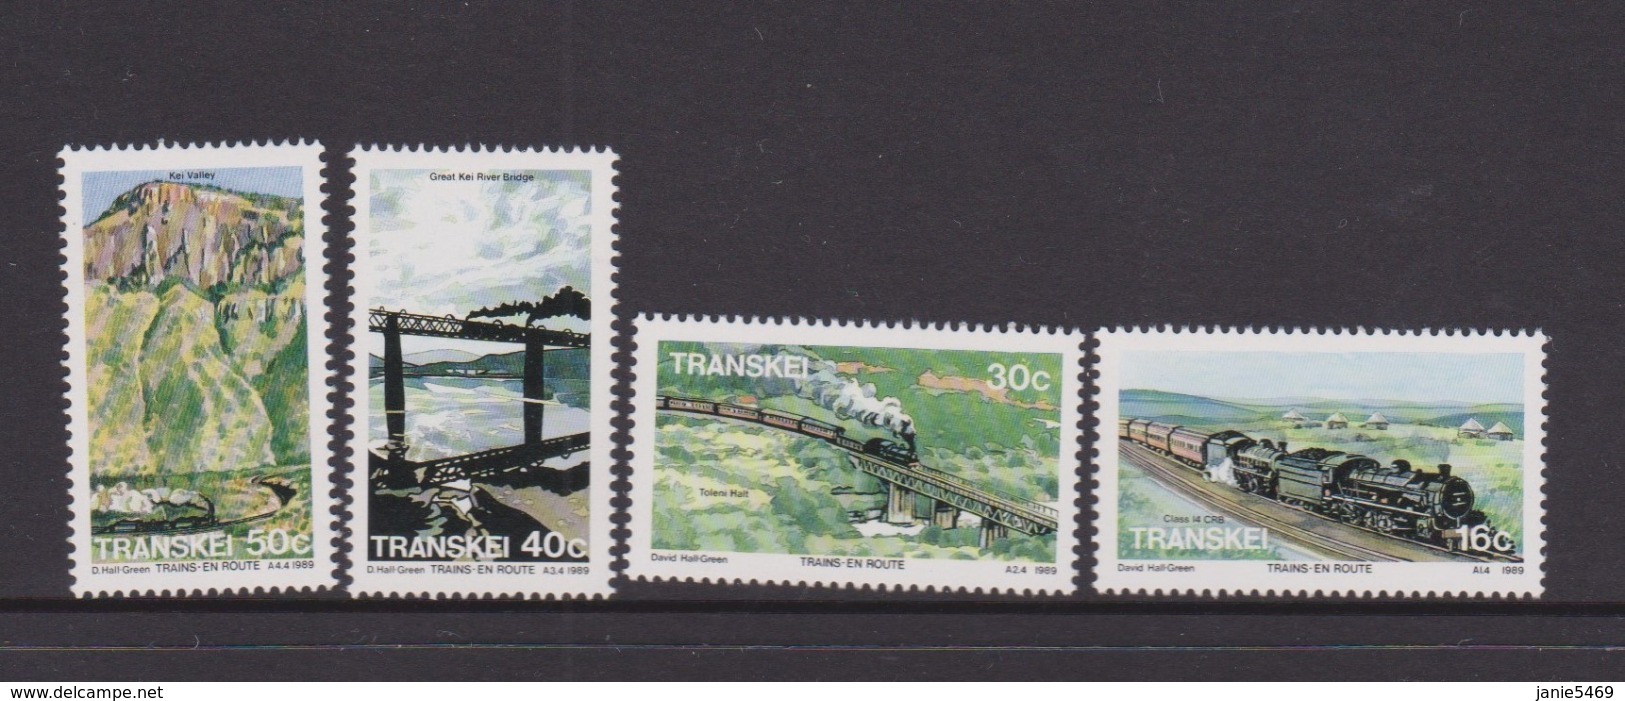 South Africa-Transkei SG 229-232 1989 Trains,Mint Never Hinged - Transkei